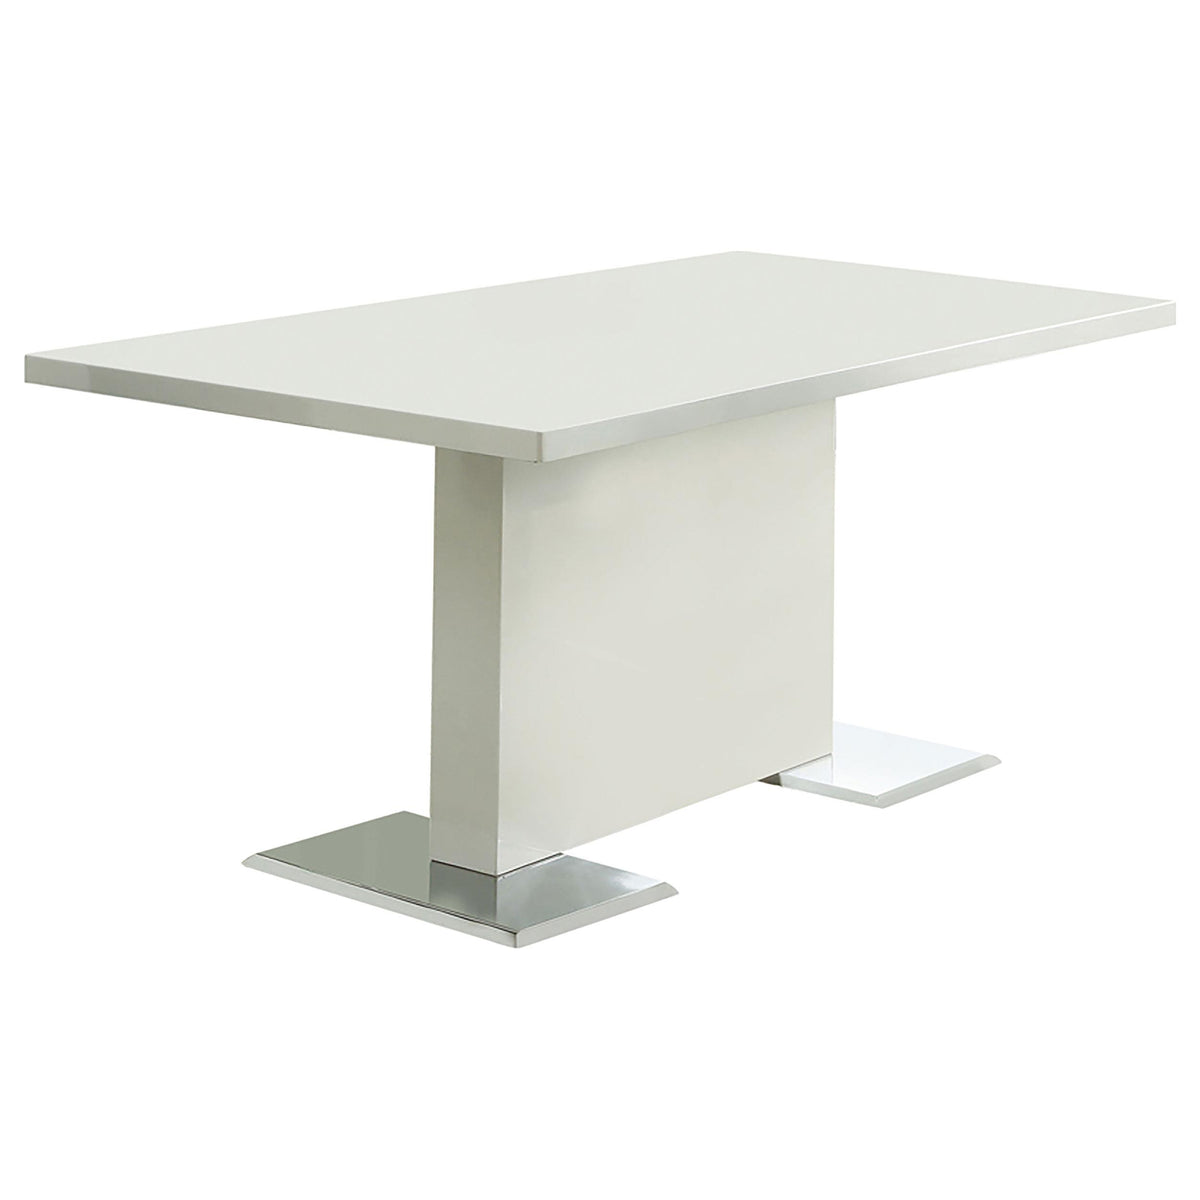 Anges T-shaped Pedestal Dining Table Glossy White Anges T-shaped Pedestal Dining Table Glossy White Half Price Furniture